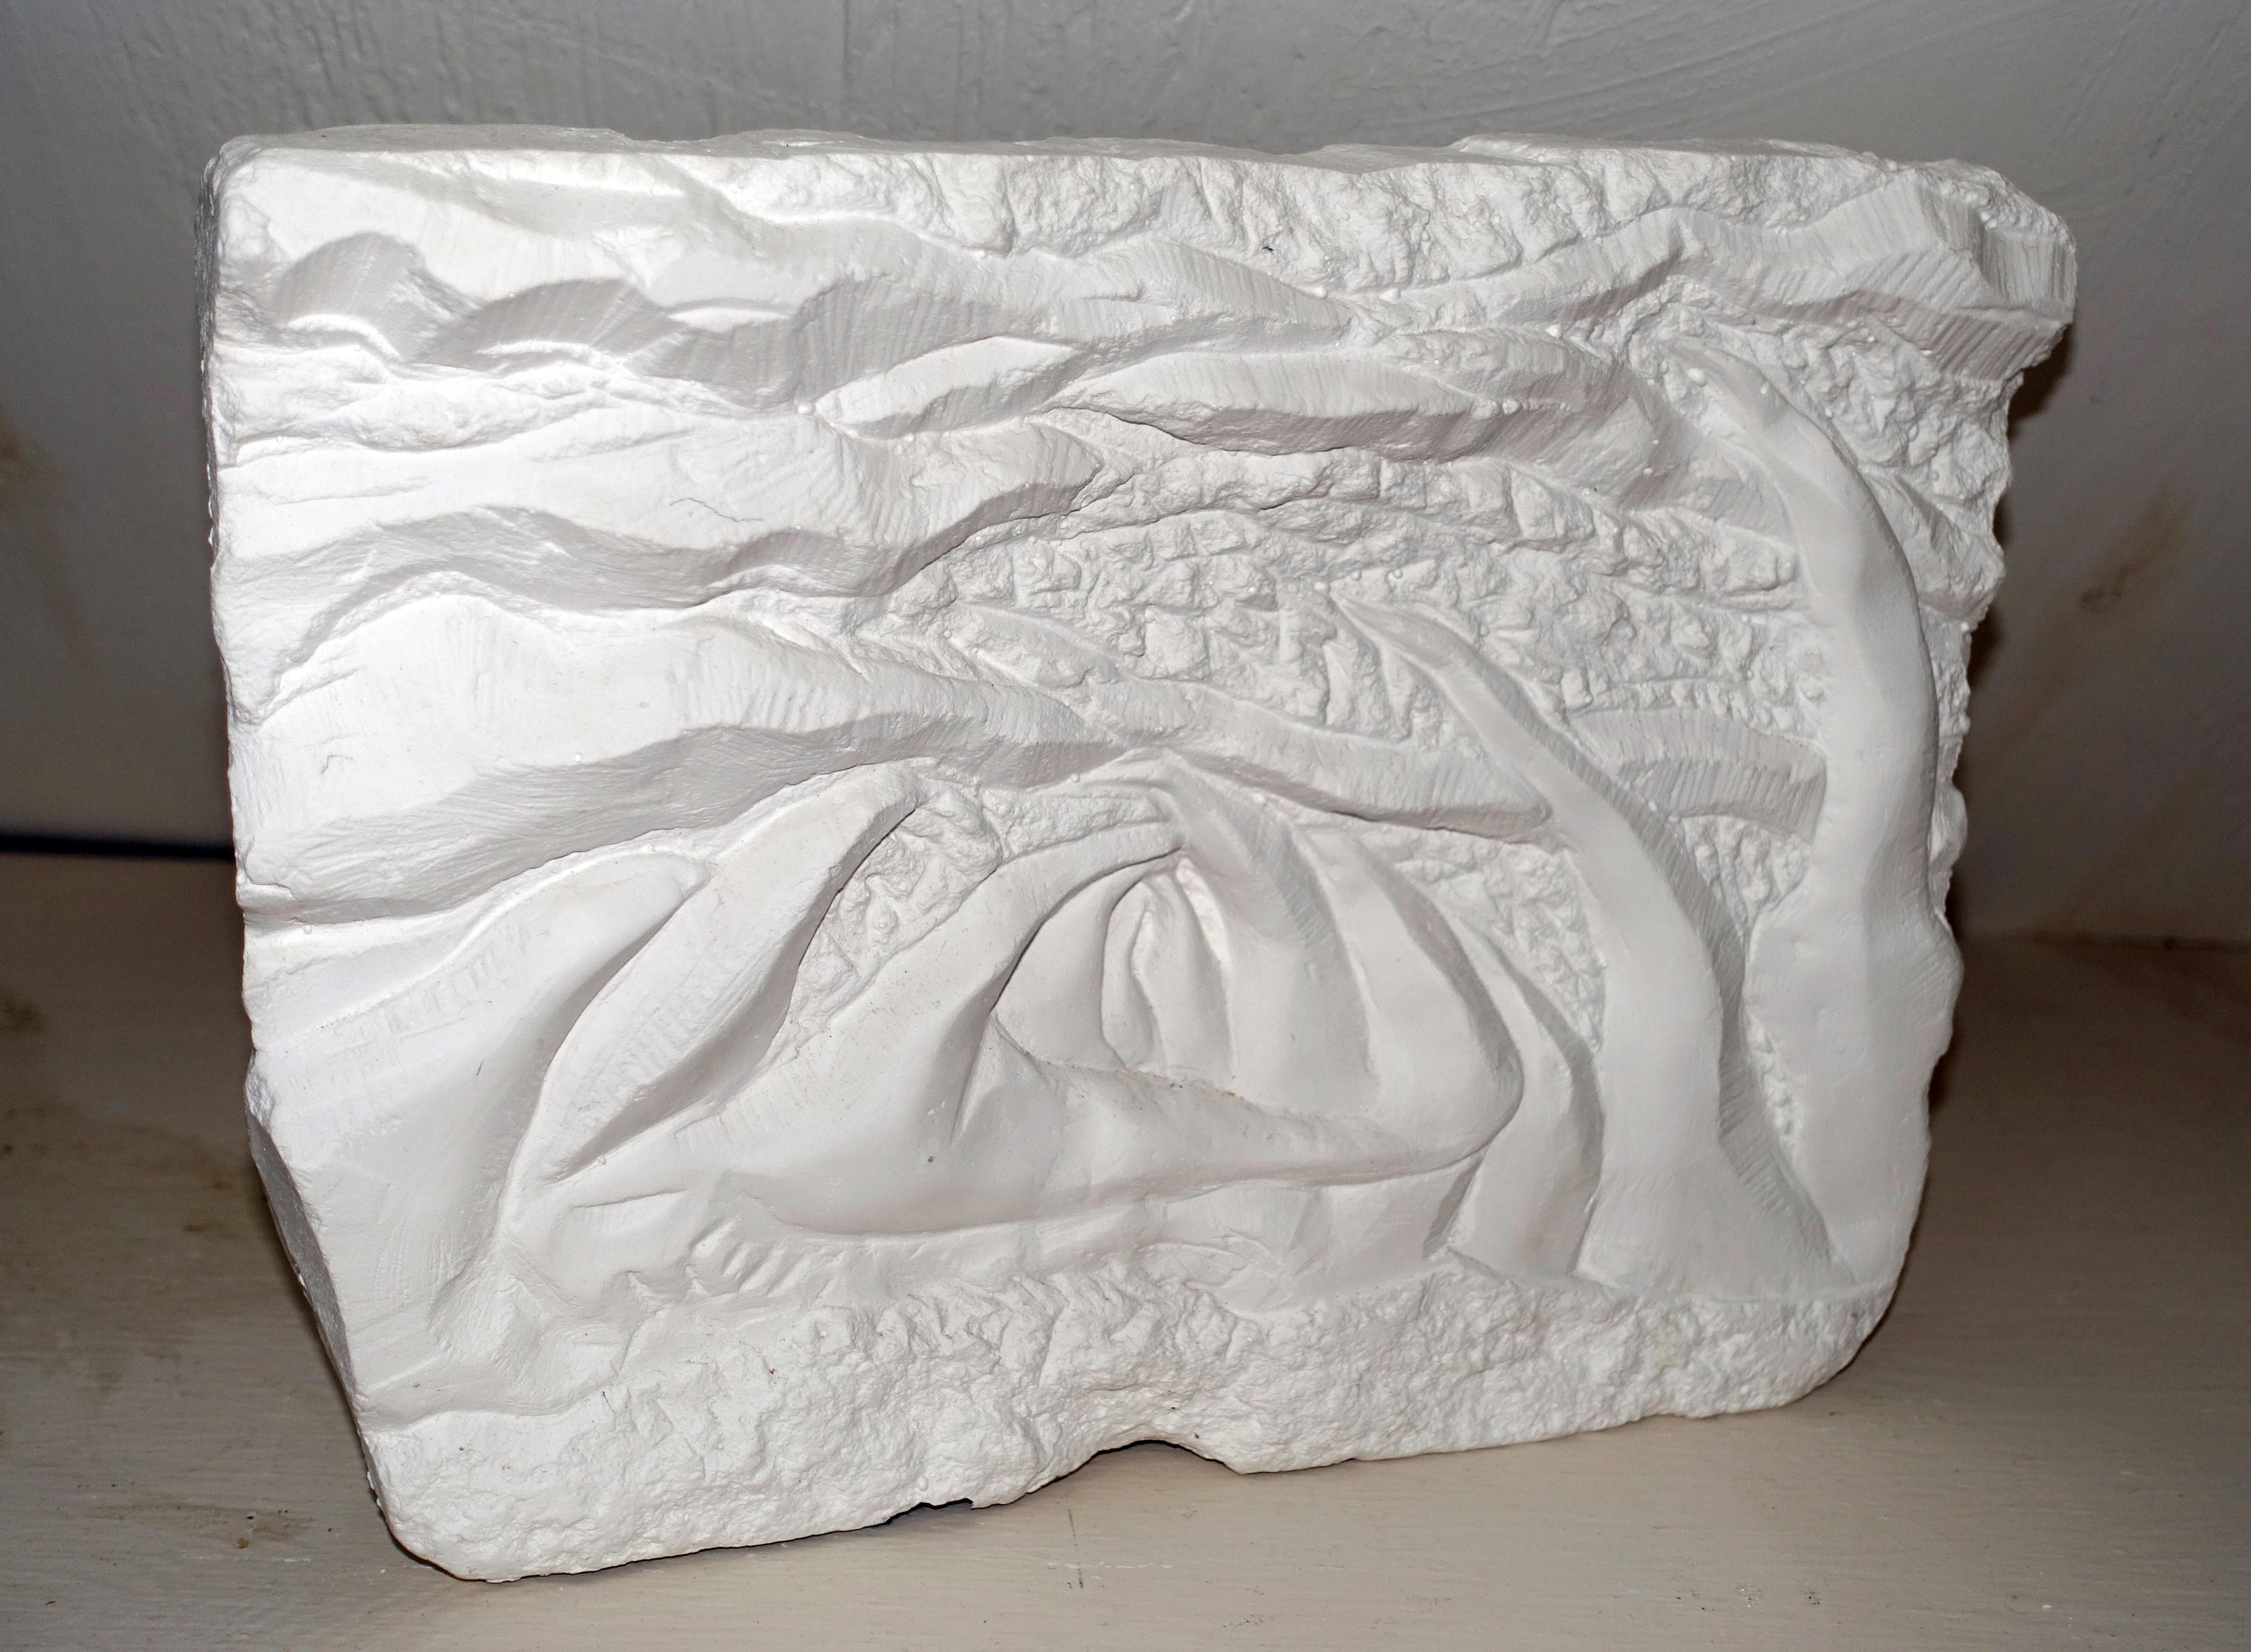 Fertile Sea: white abstract relief sculpture of the ocean, wall or shelf mounted - Sculpture by Ava Blitz